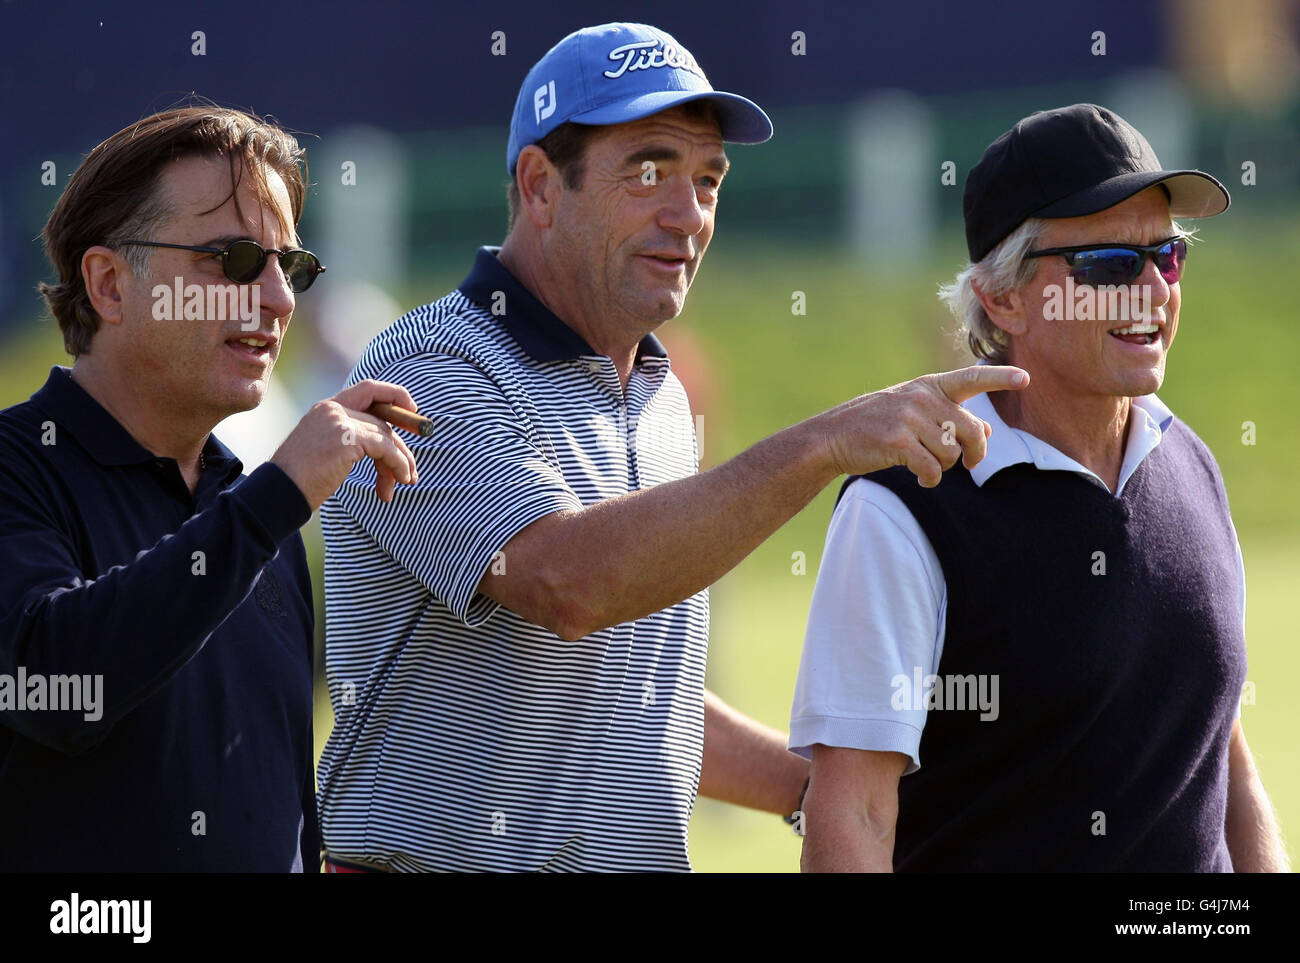 (left-right) Andy Garcia, Huey Lewis and Michael Douglas on the 1st hole during a practice day for the Alfred Dunhill Links Championships at the Old Course, St Andrews. Stock Photo